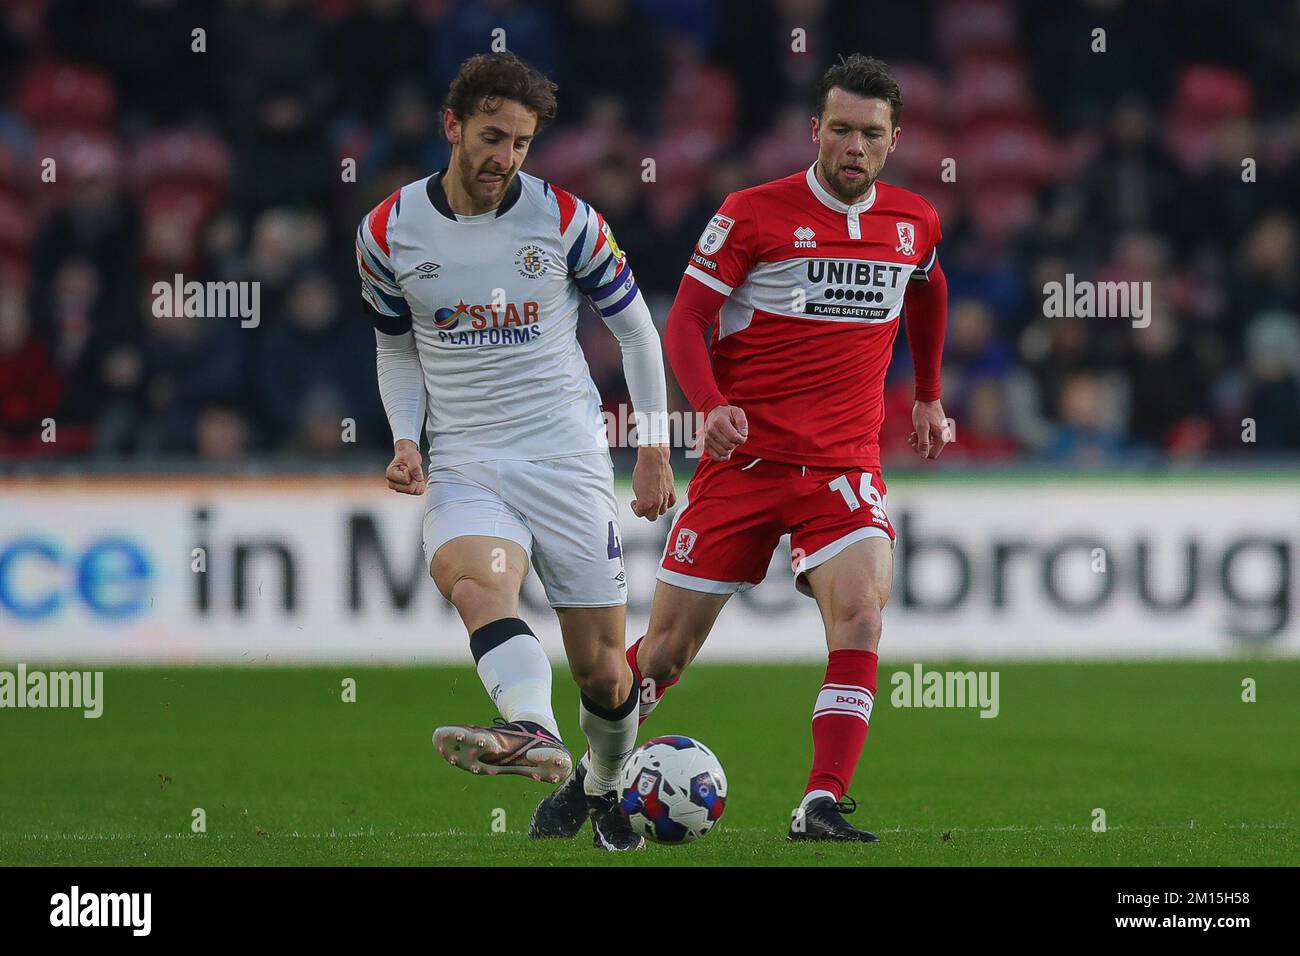 Tom Lockyer #4 of Luton Town and Jonathan Howson #16 of Middlesbrough battle for the ball during the Sky Bet Championship match Middlesbrough vs Luton Town at Riverside Stadium, Middlesbrough, United Kingdom, 10th December 2022  (Photo by James Heaton/News Images) Stock Photo